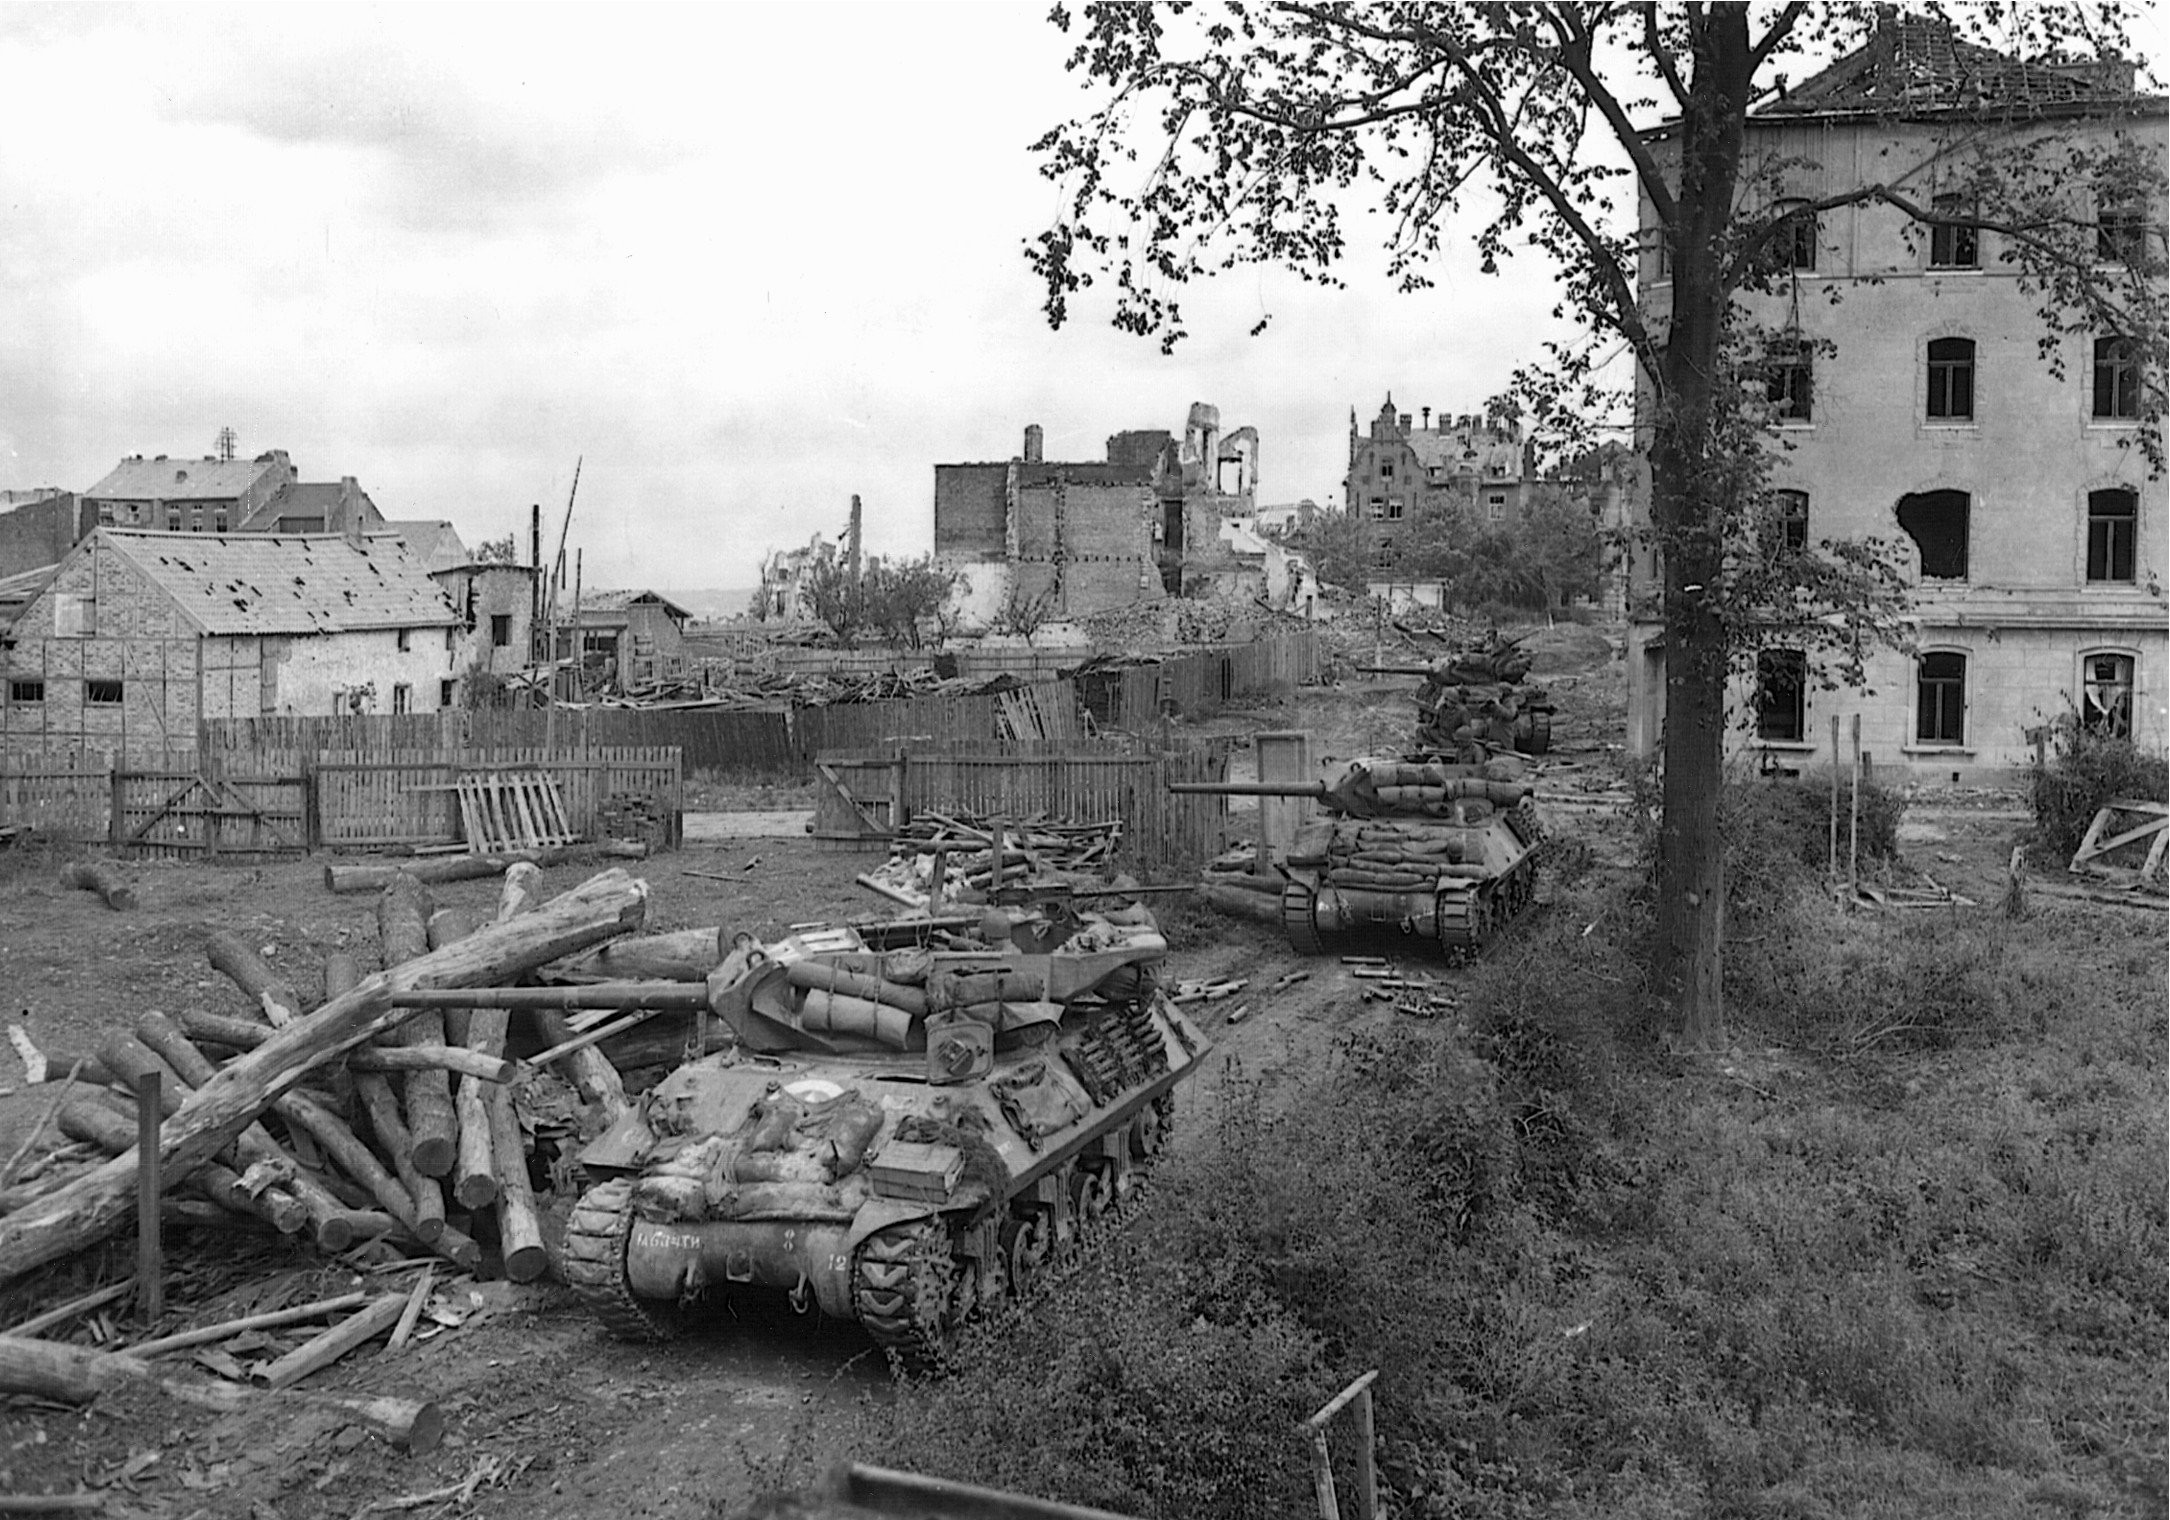 Near Aachen on October 14, 1944, open-turreted American M-10 tank destroyers fire on German observation posts in preparation for an assault and to prevent the ranging of German artillery. (National Archives)